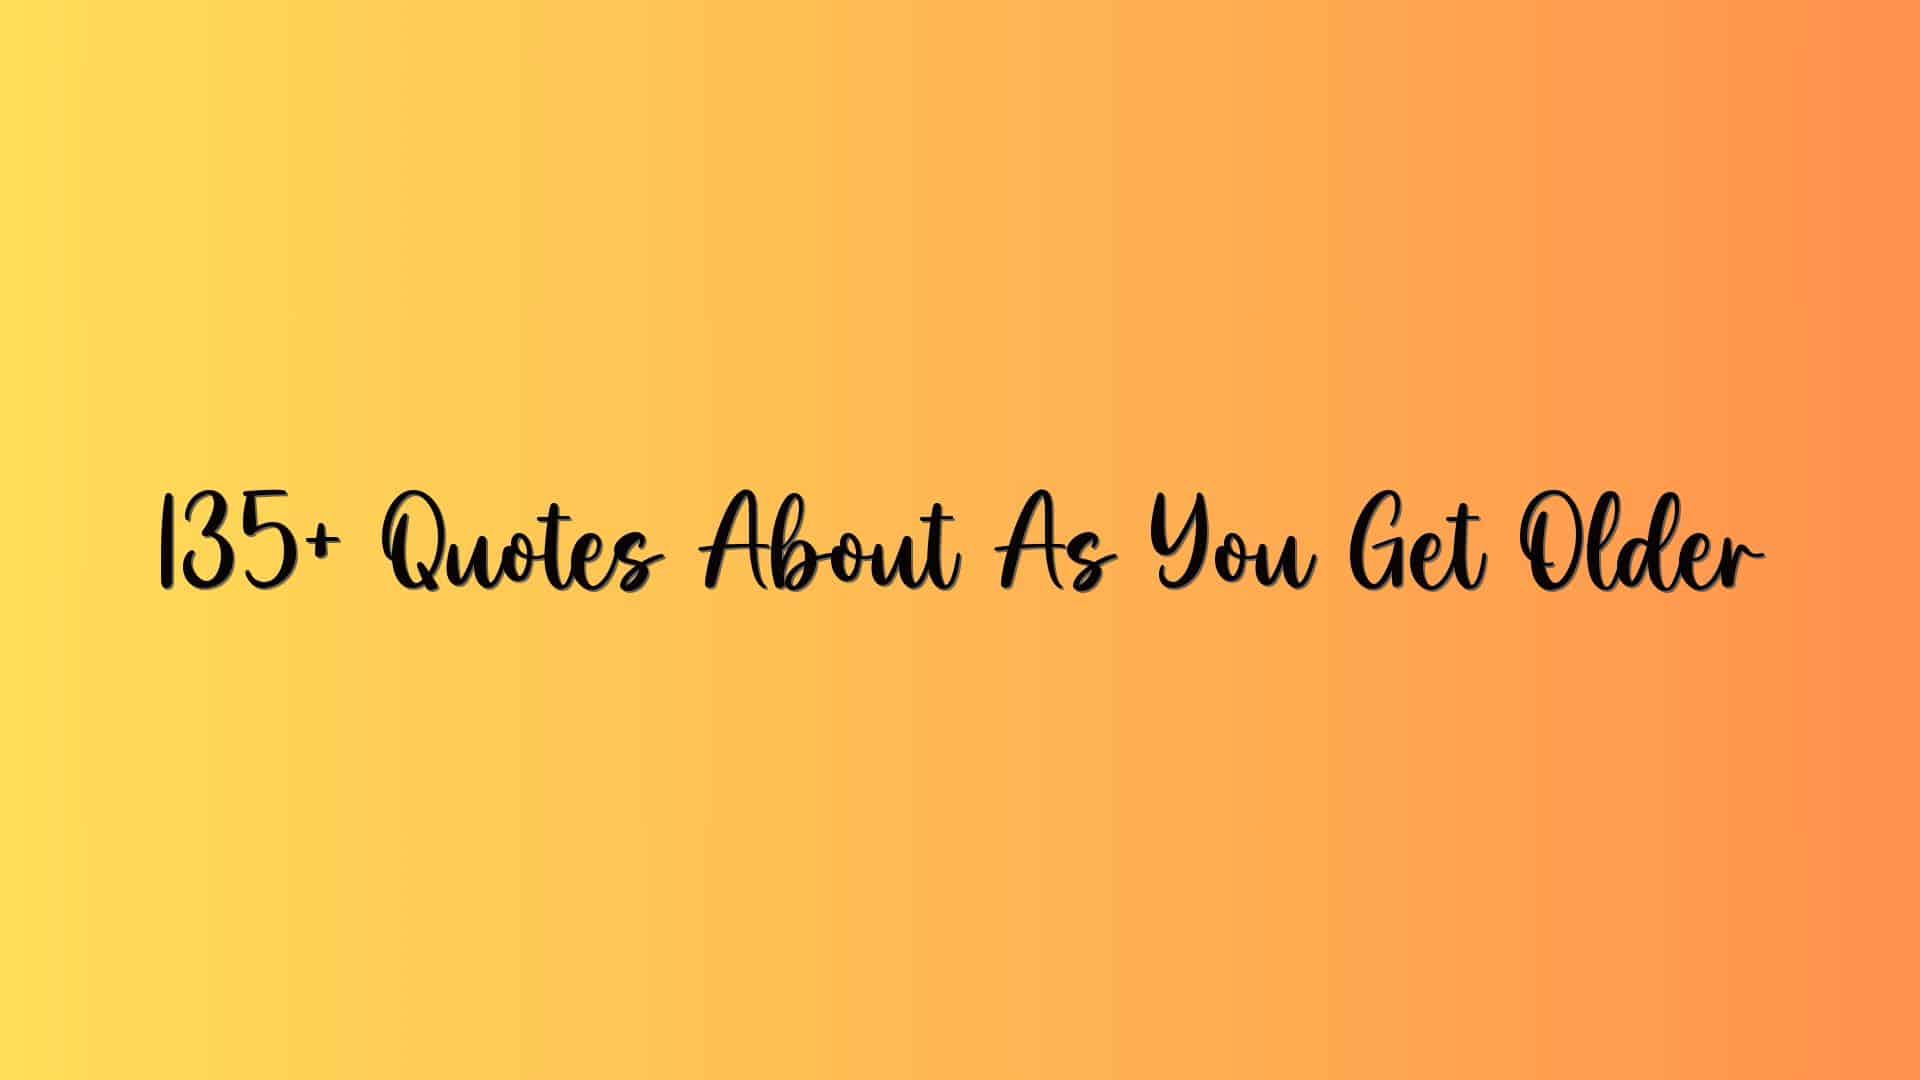 135+ Quotes About As You Get Older